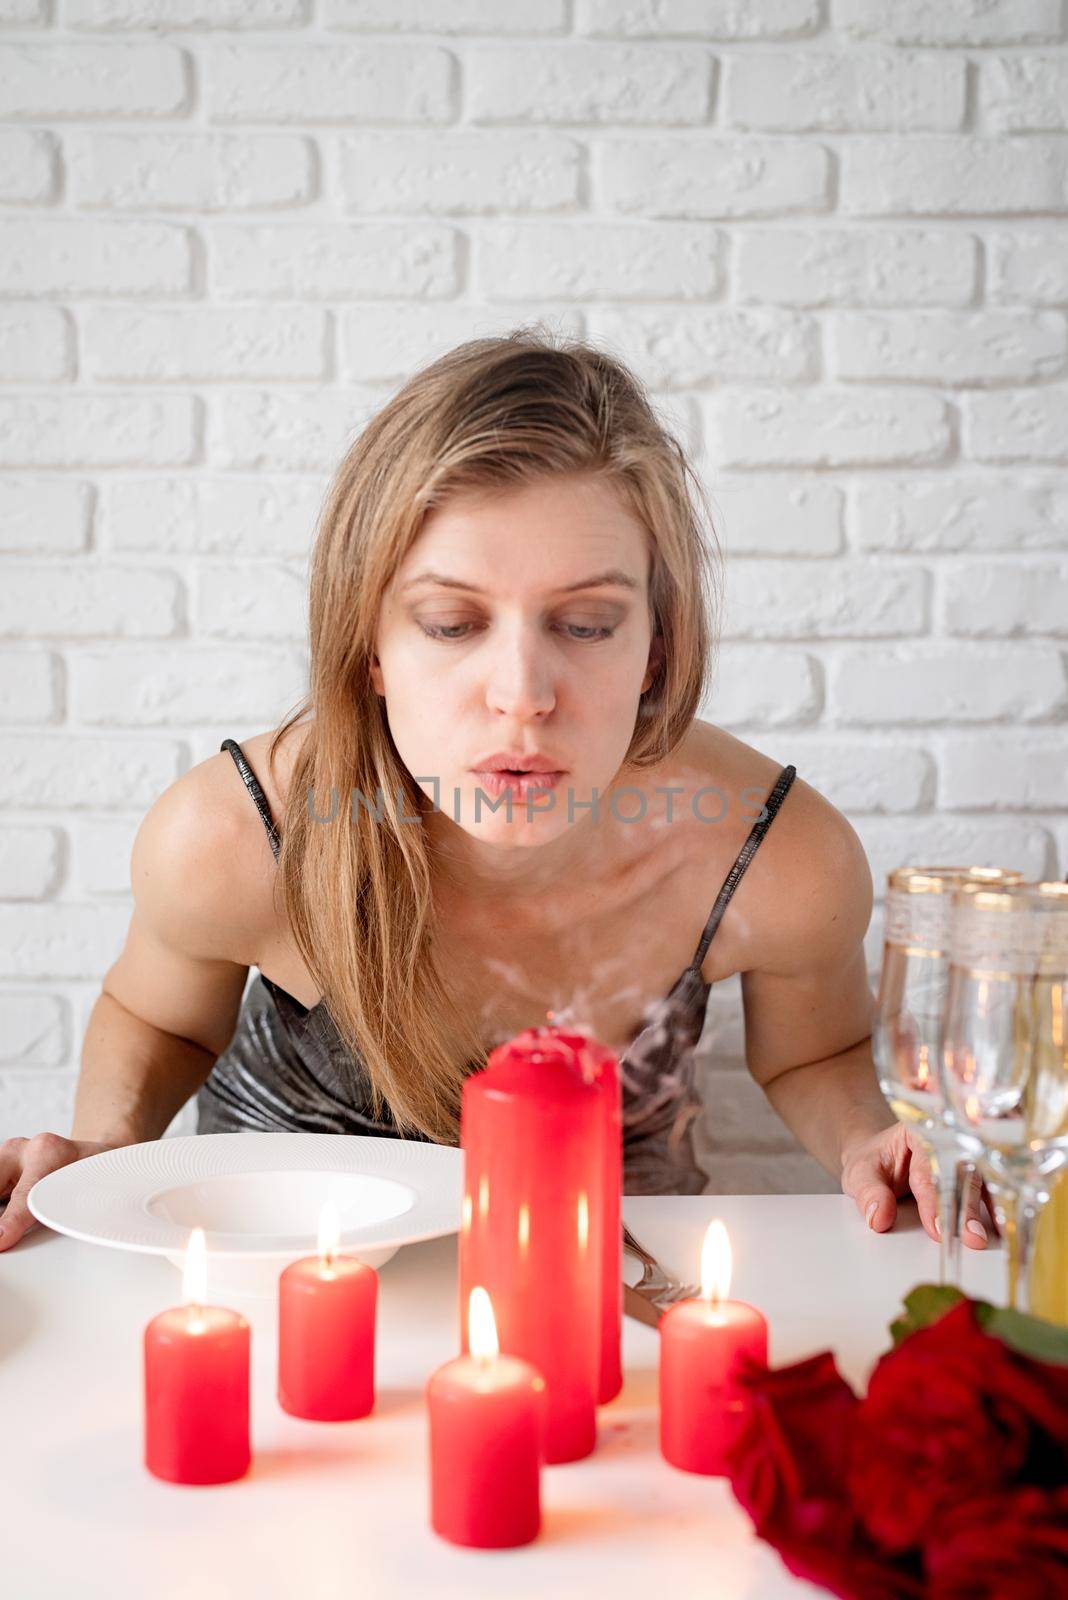 Romantic date, young woman blowing out candle on romantic date table